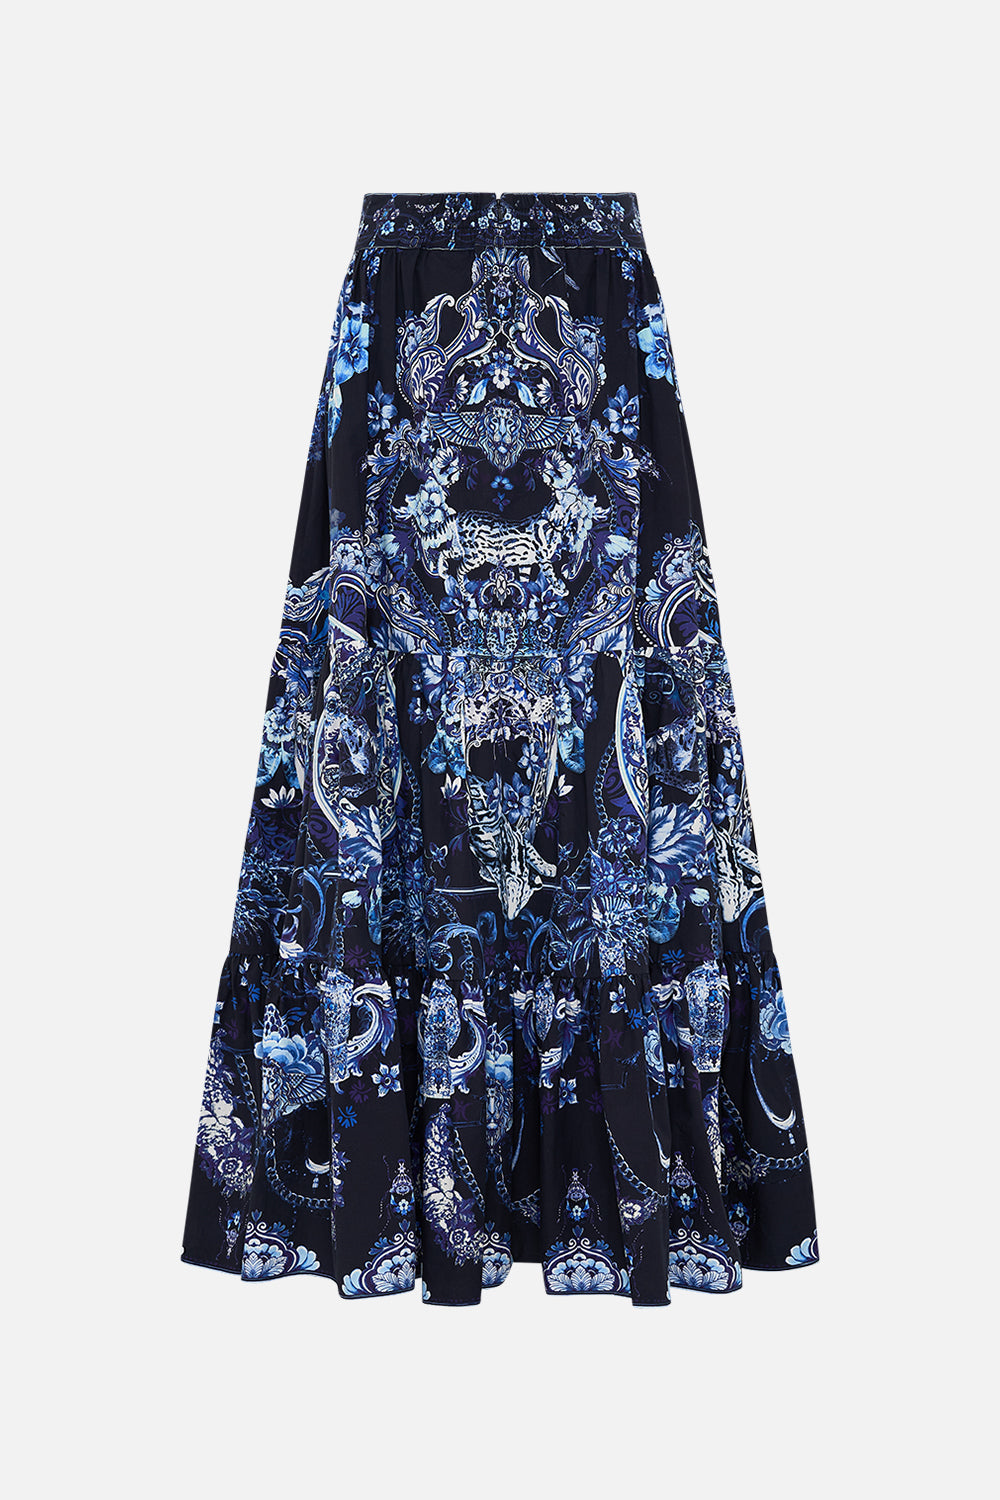 Back view of CAMILLA maxi skirt in Delft Dynasty print